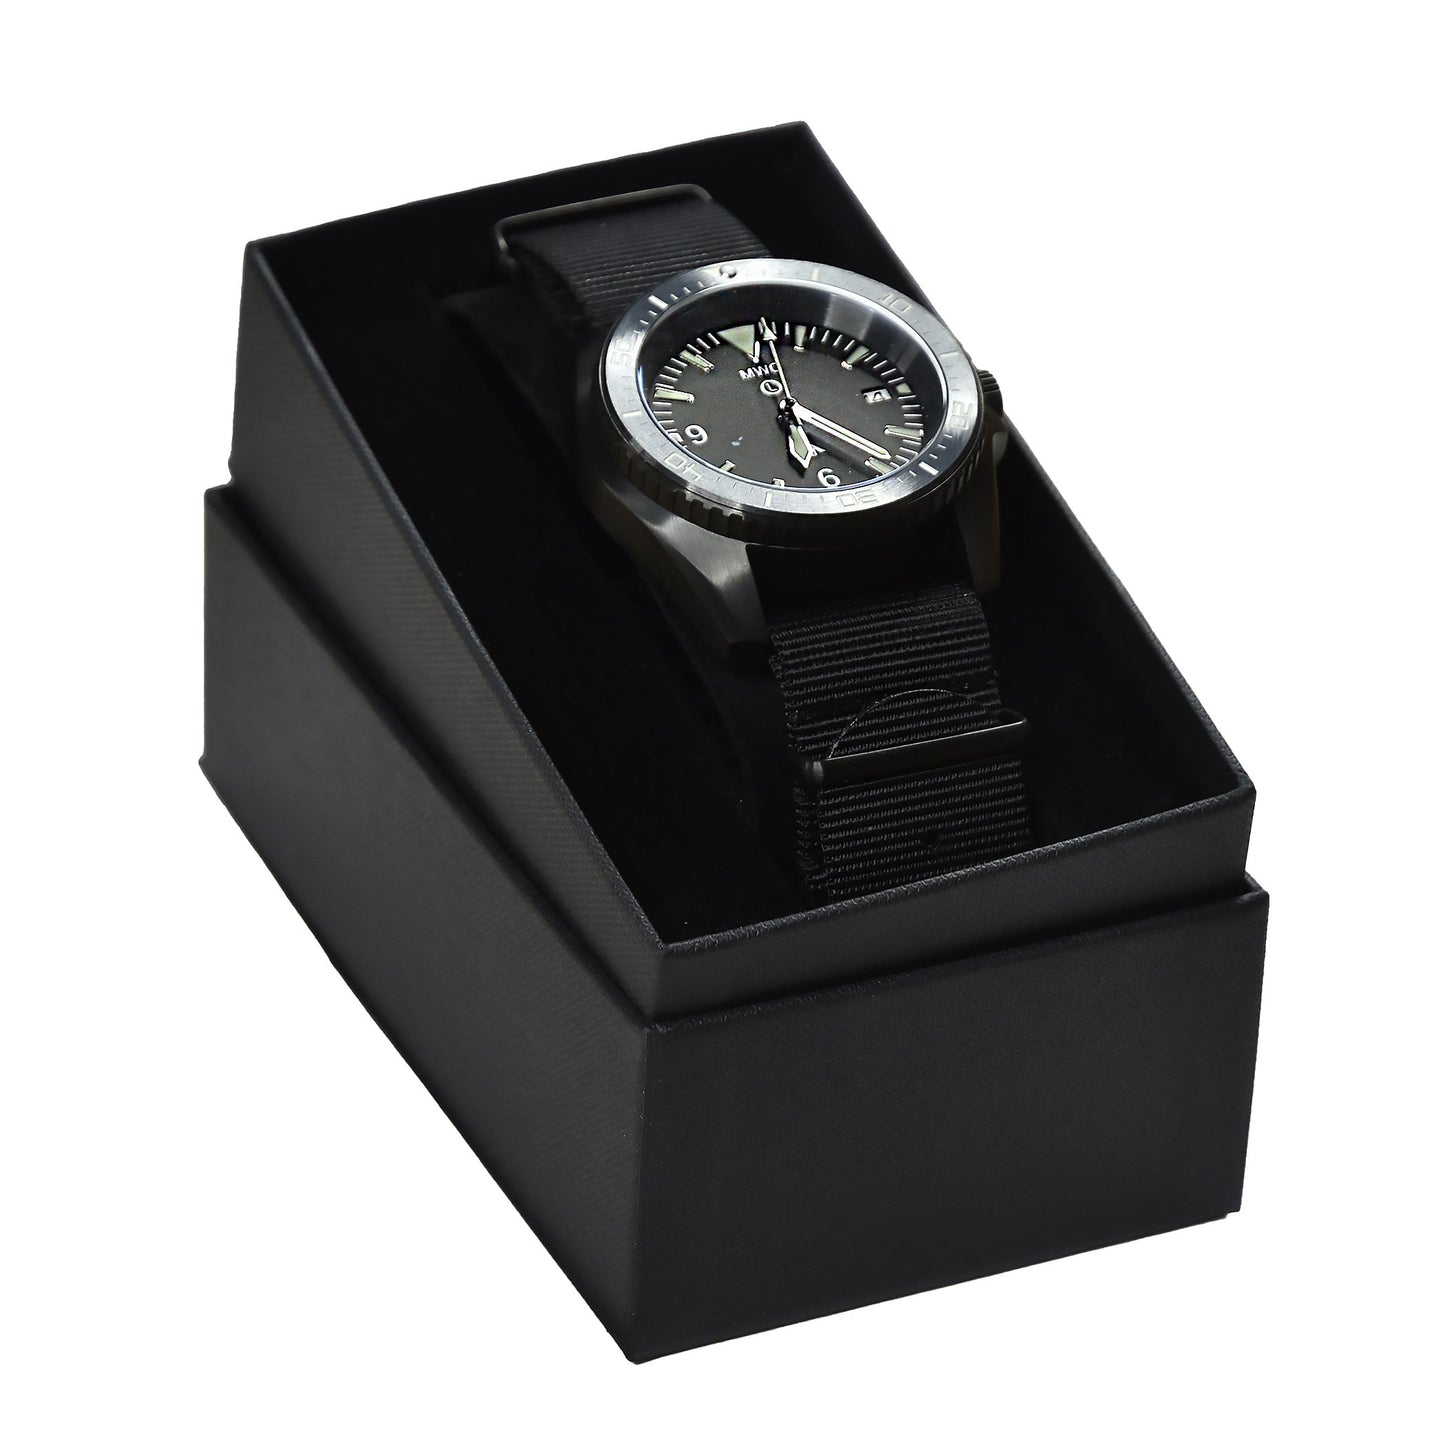 MWC Military Divers Watch in PVD Steel Case (Automatic) Latest Model with Ceramic Bezel and Sapphire Crystal